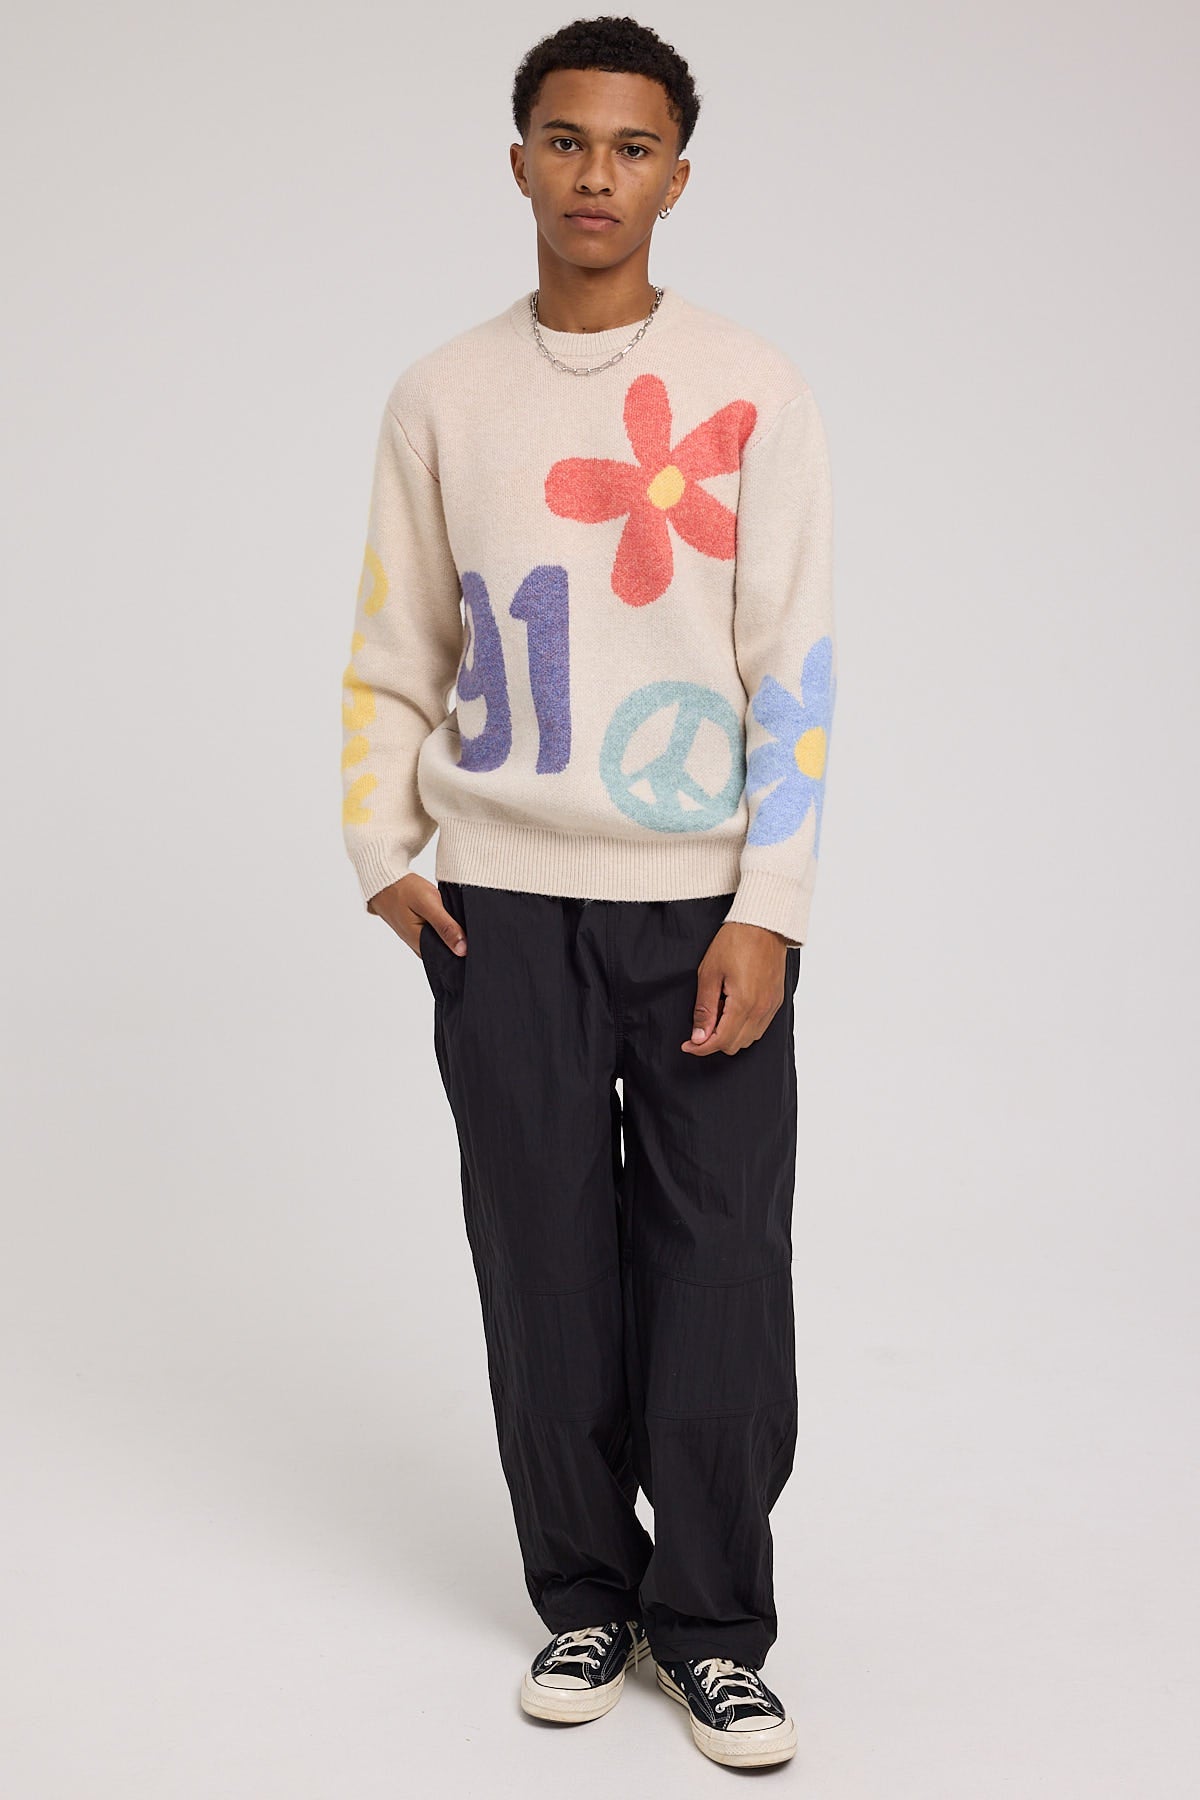 Xlarge Flower and Peace Recycled Knit Off White Off White